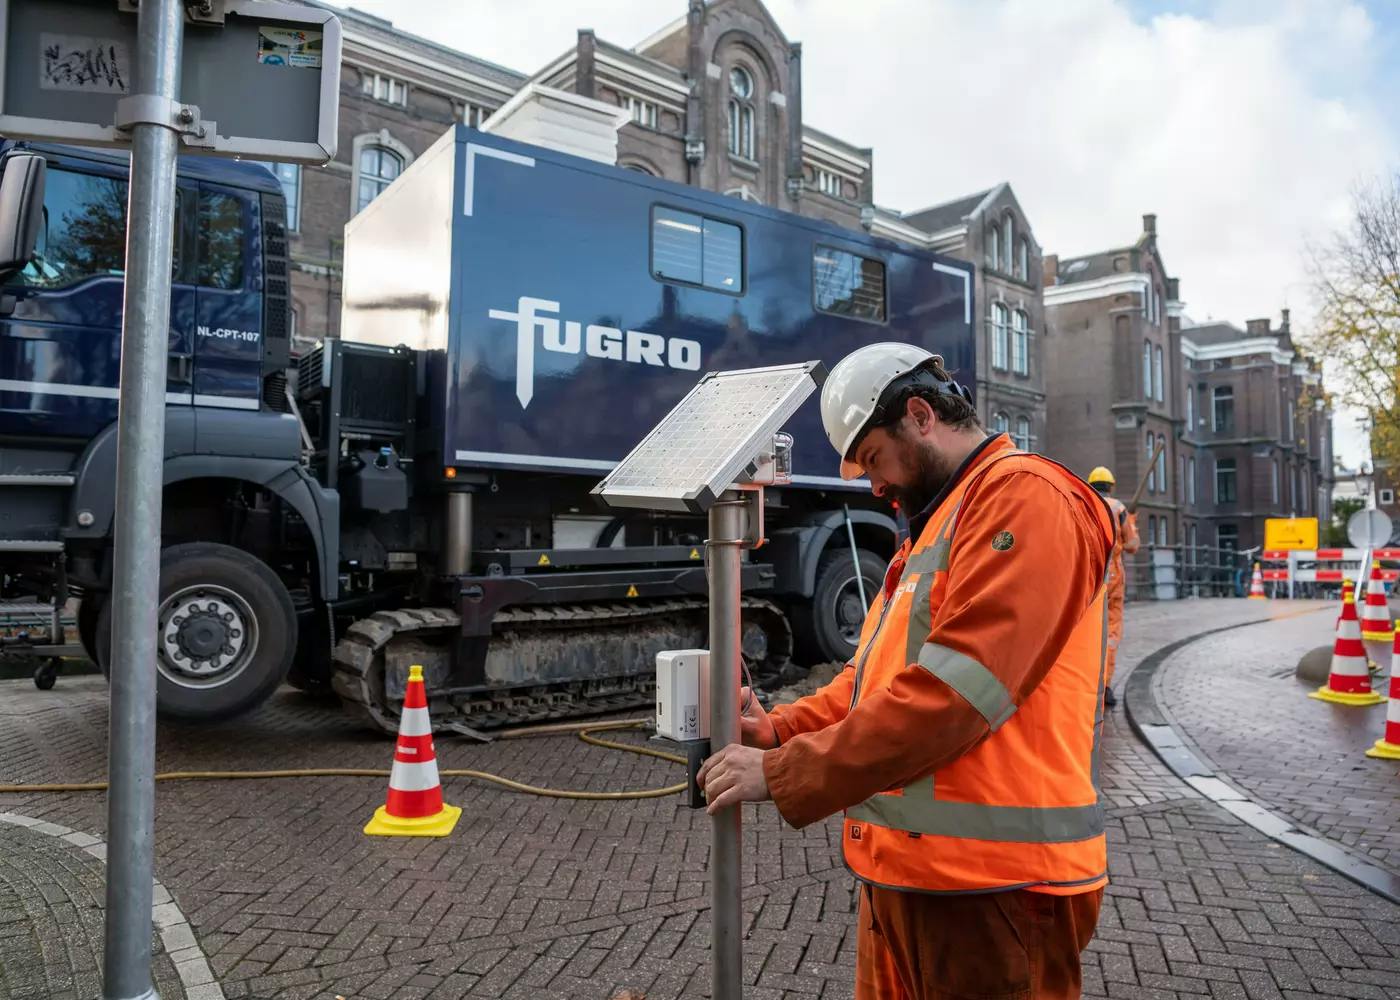 Site investigation (CPT and drilling) and monitoring
Performing CPT, drilling and monitoring of the Grimburgwal canal in Amsterdam